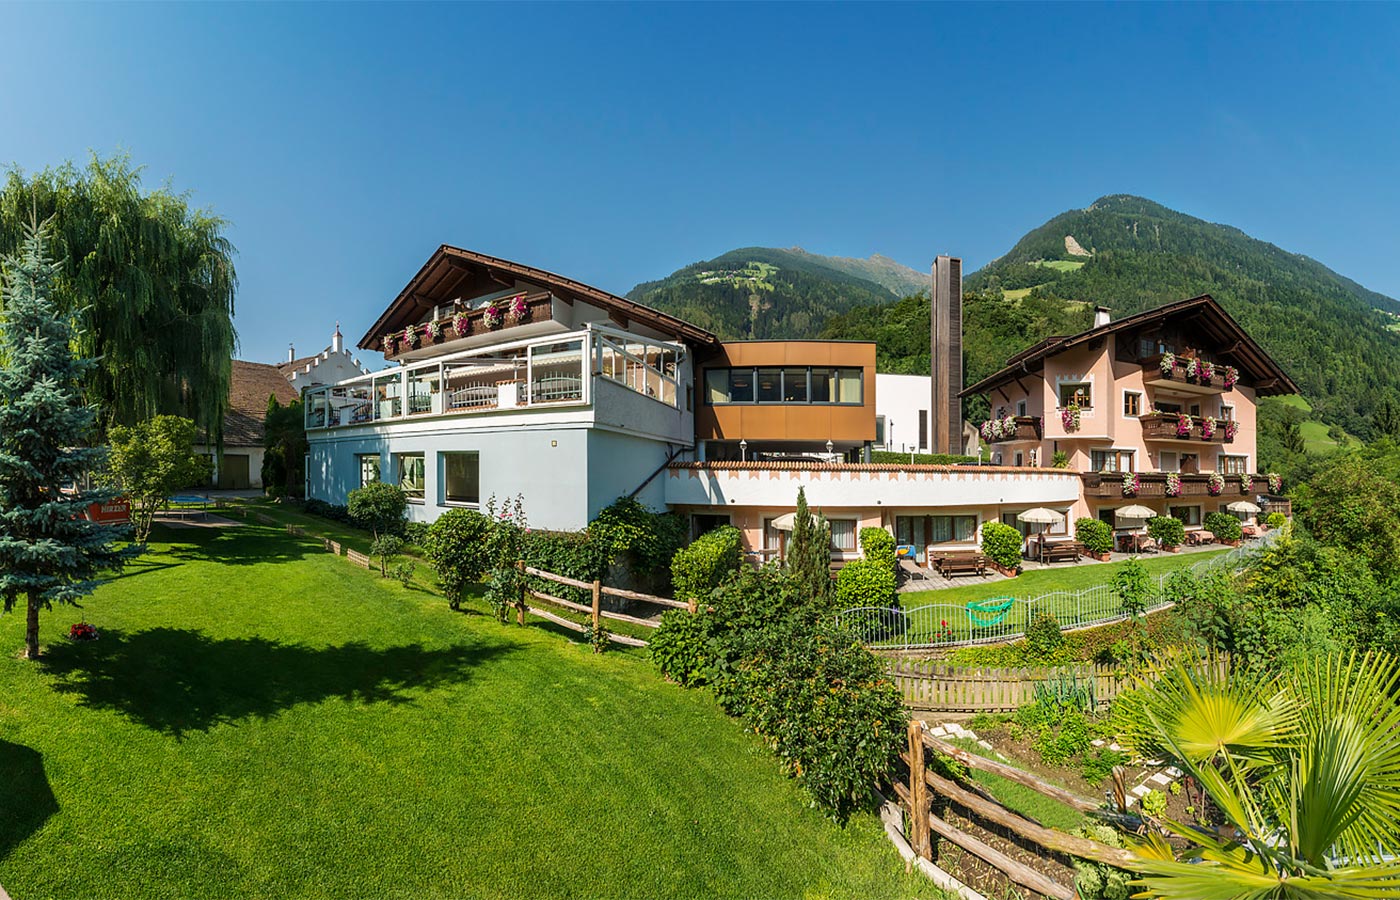 Garden surrounded by nature at the Hotel Alpenhof